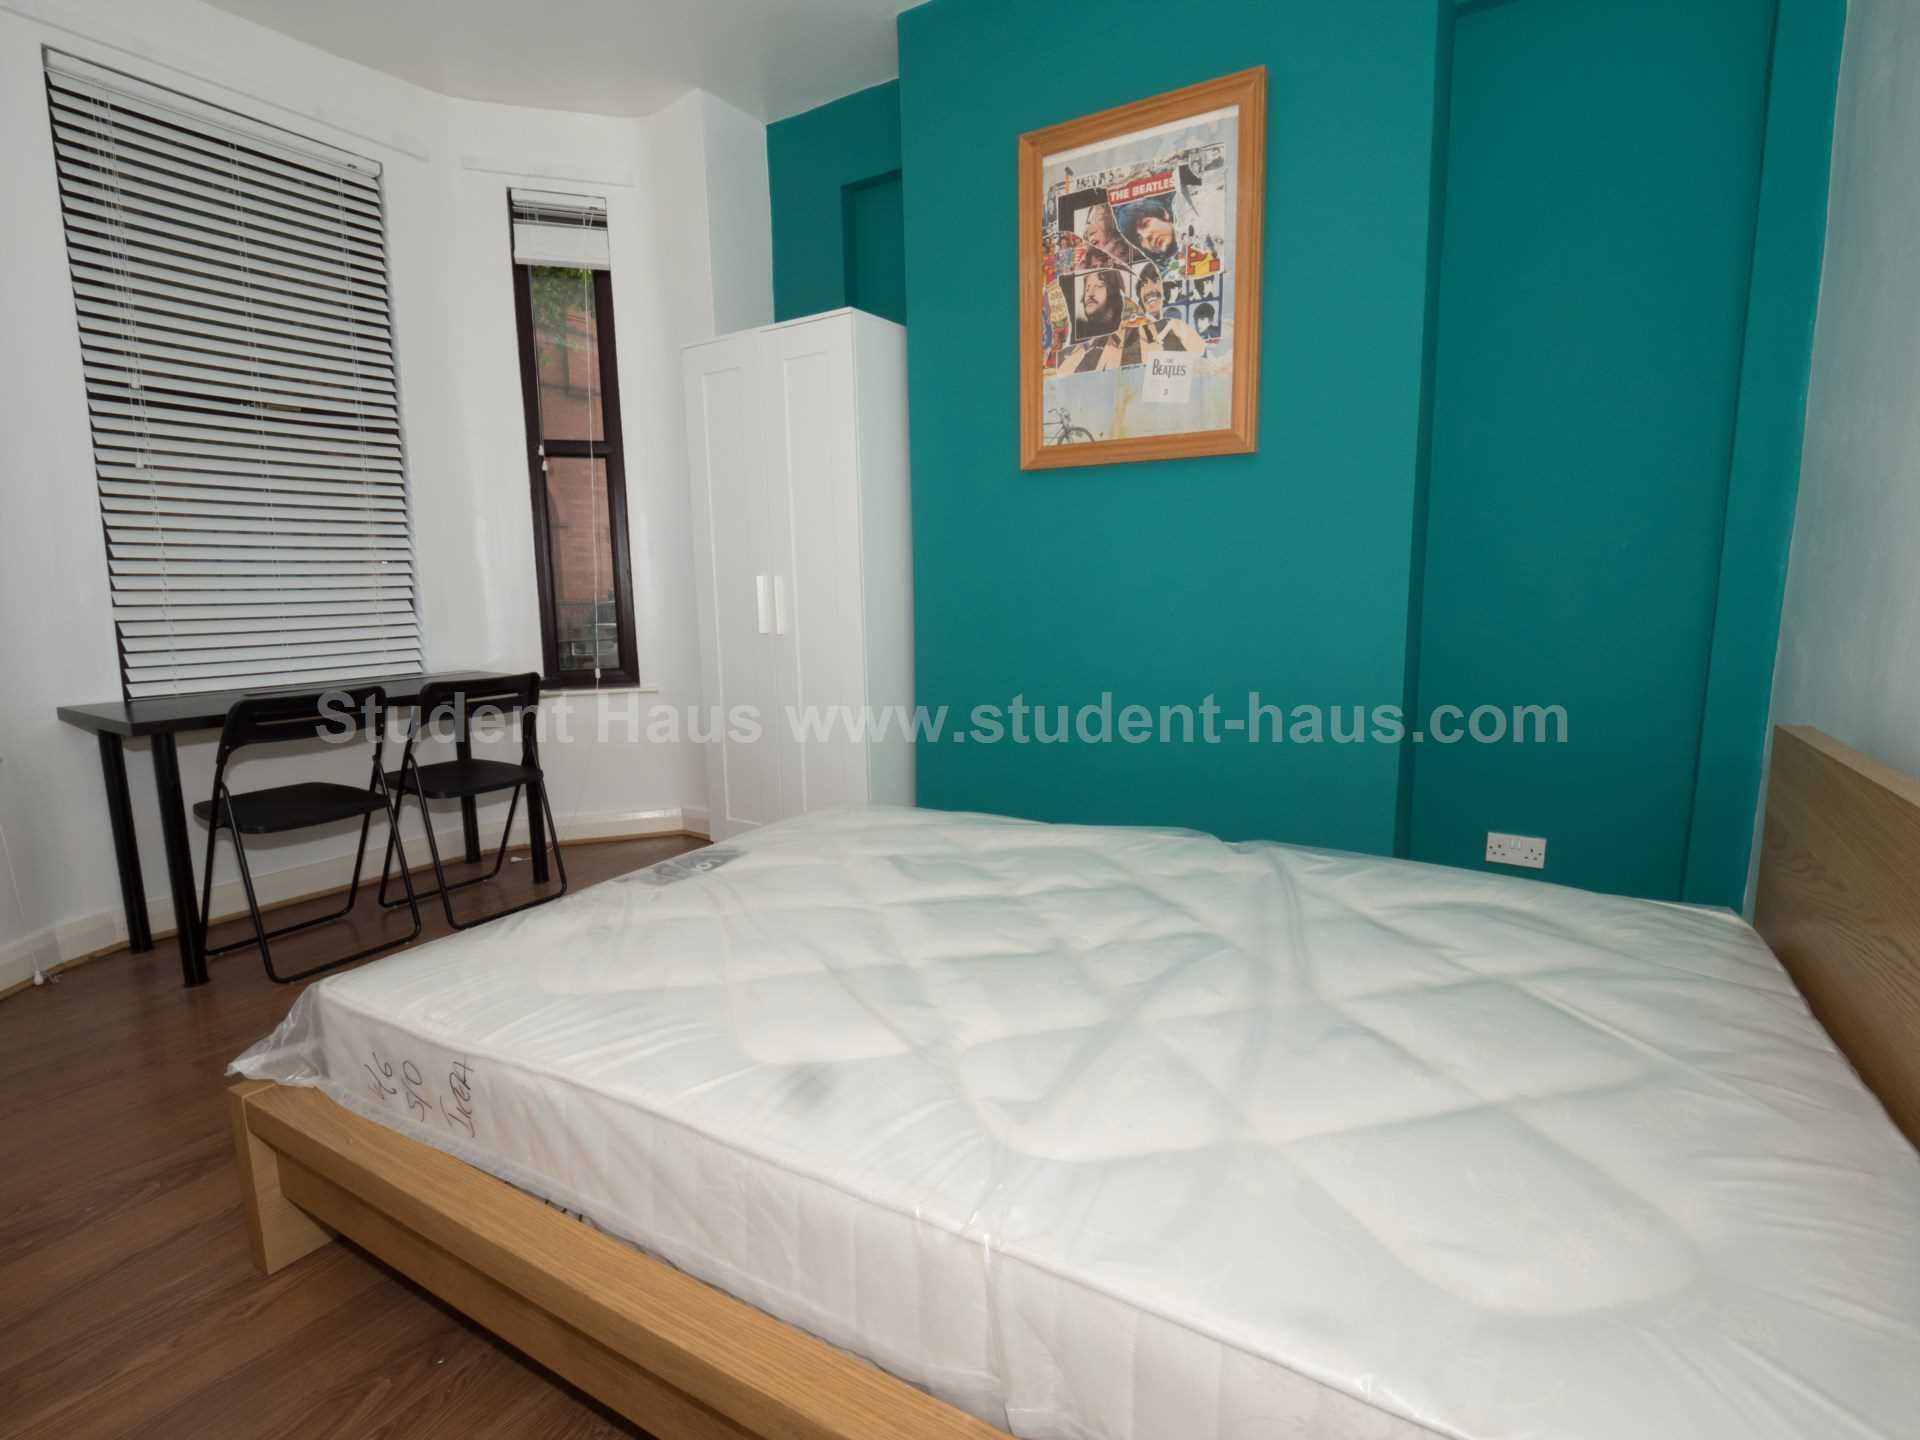 4 bed House (unspecified) for rent in Salford. From Student Haus